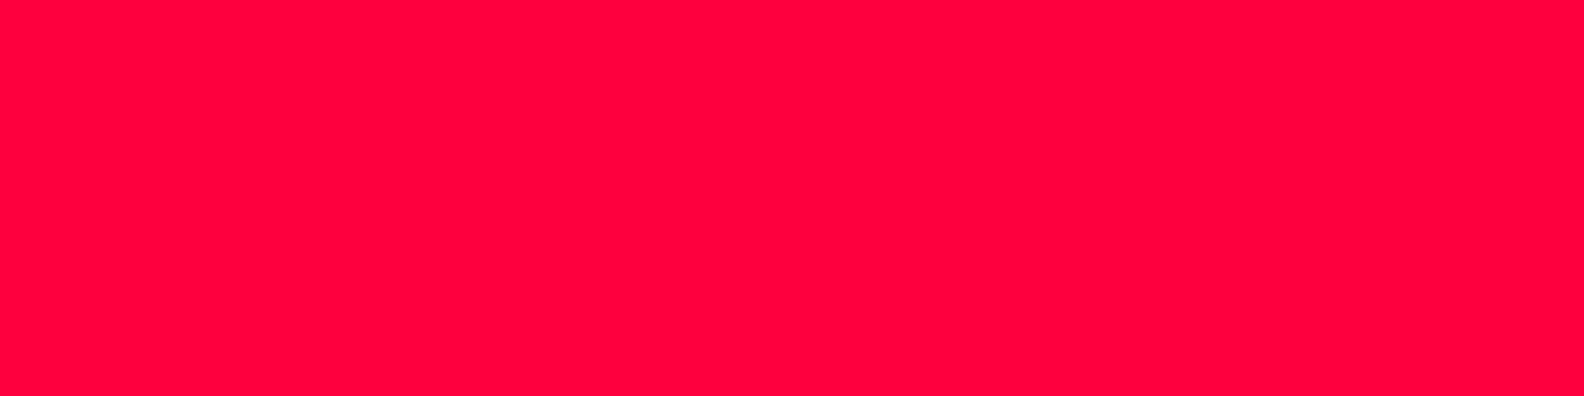 1584x396 Electric Crimson Solid Color Background